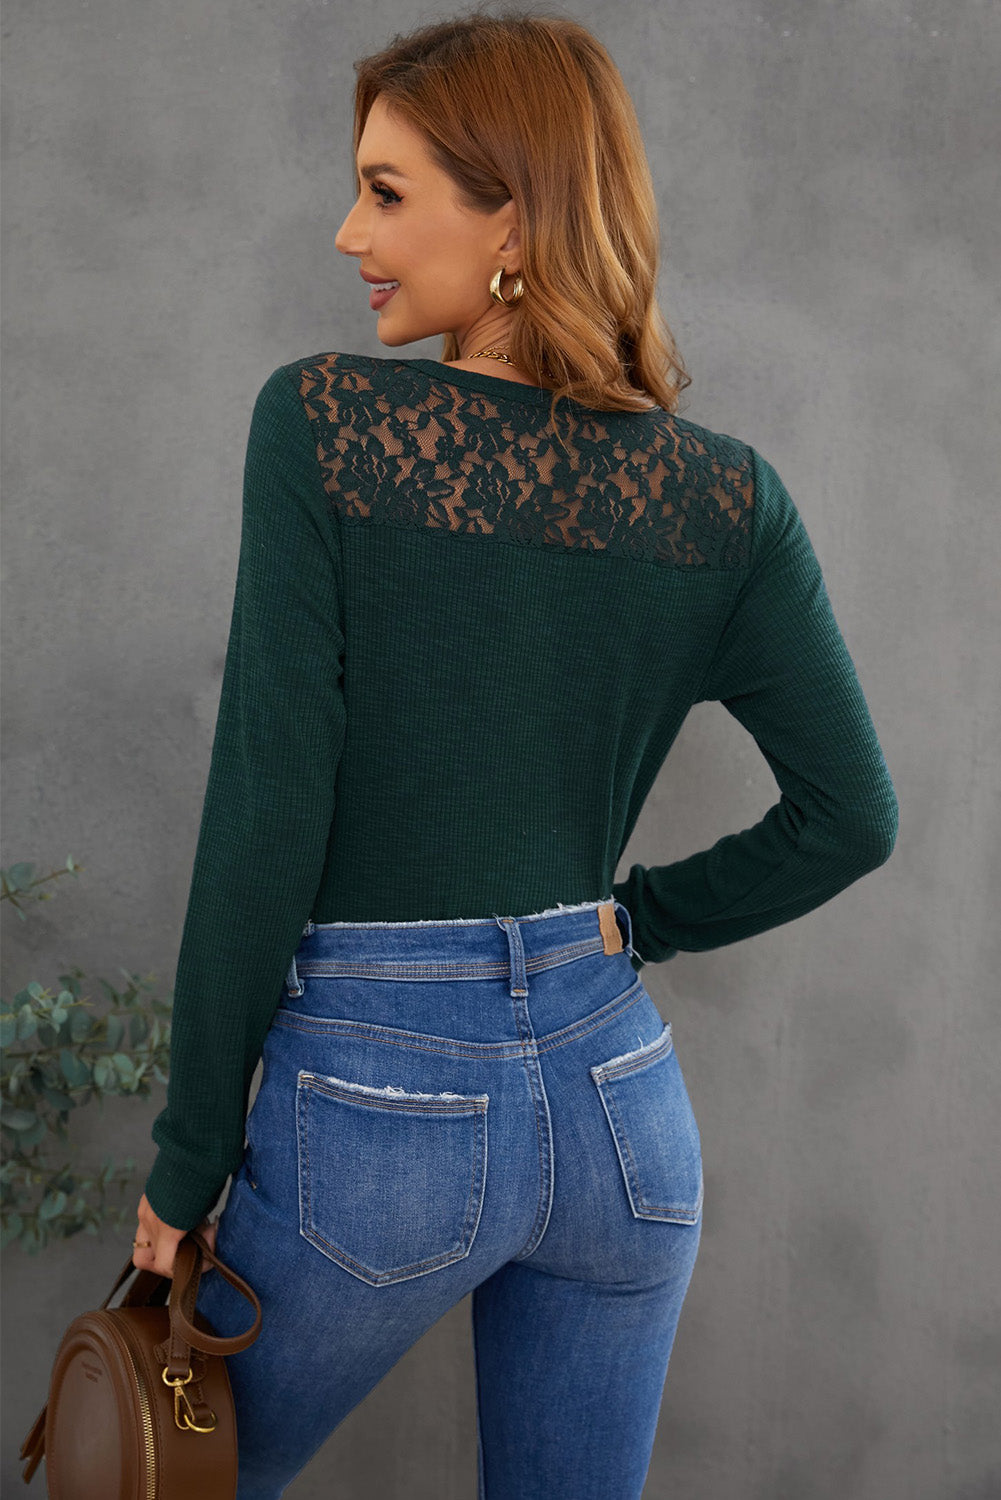 Lace Back Buttoned Henley Top